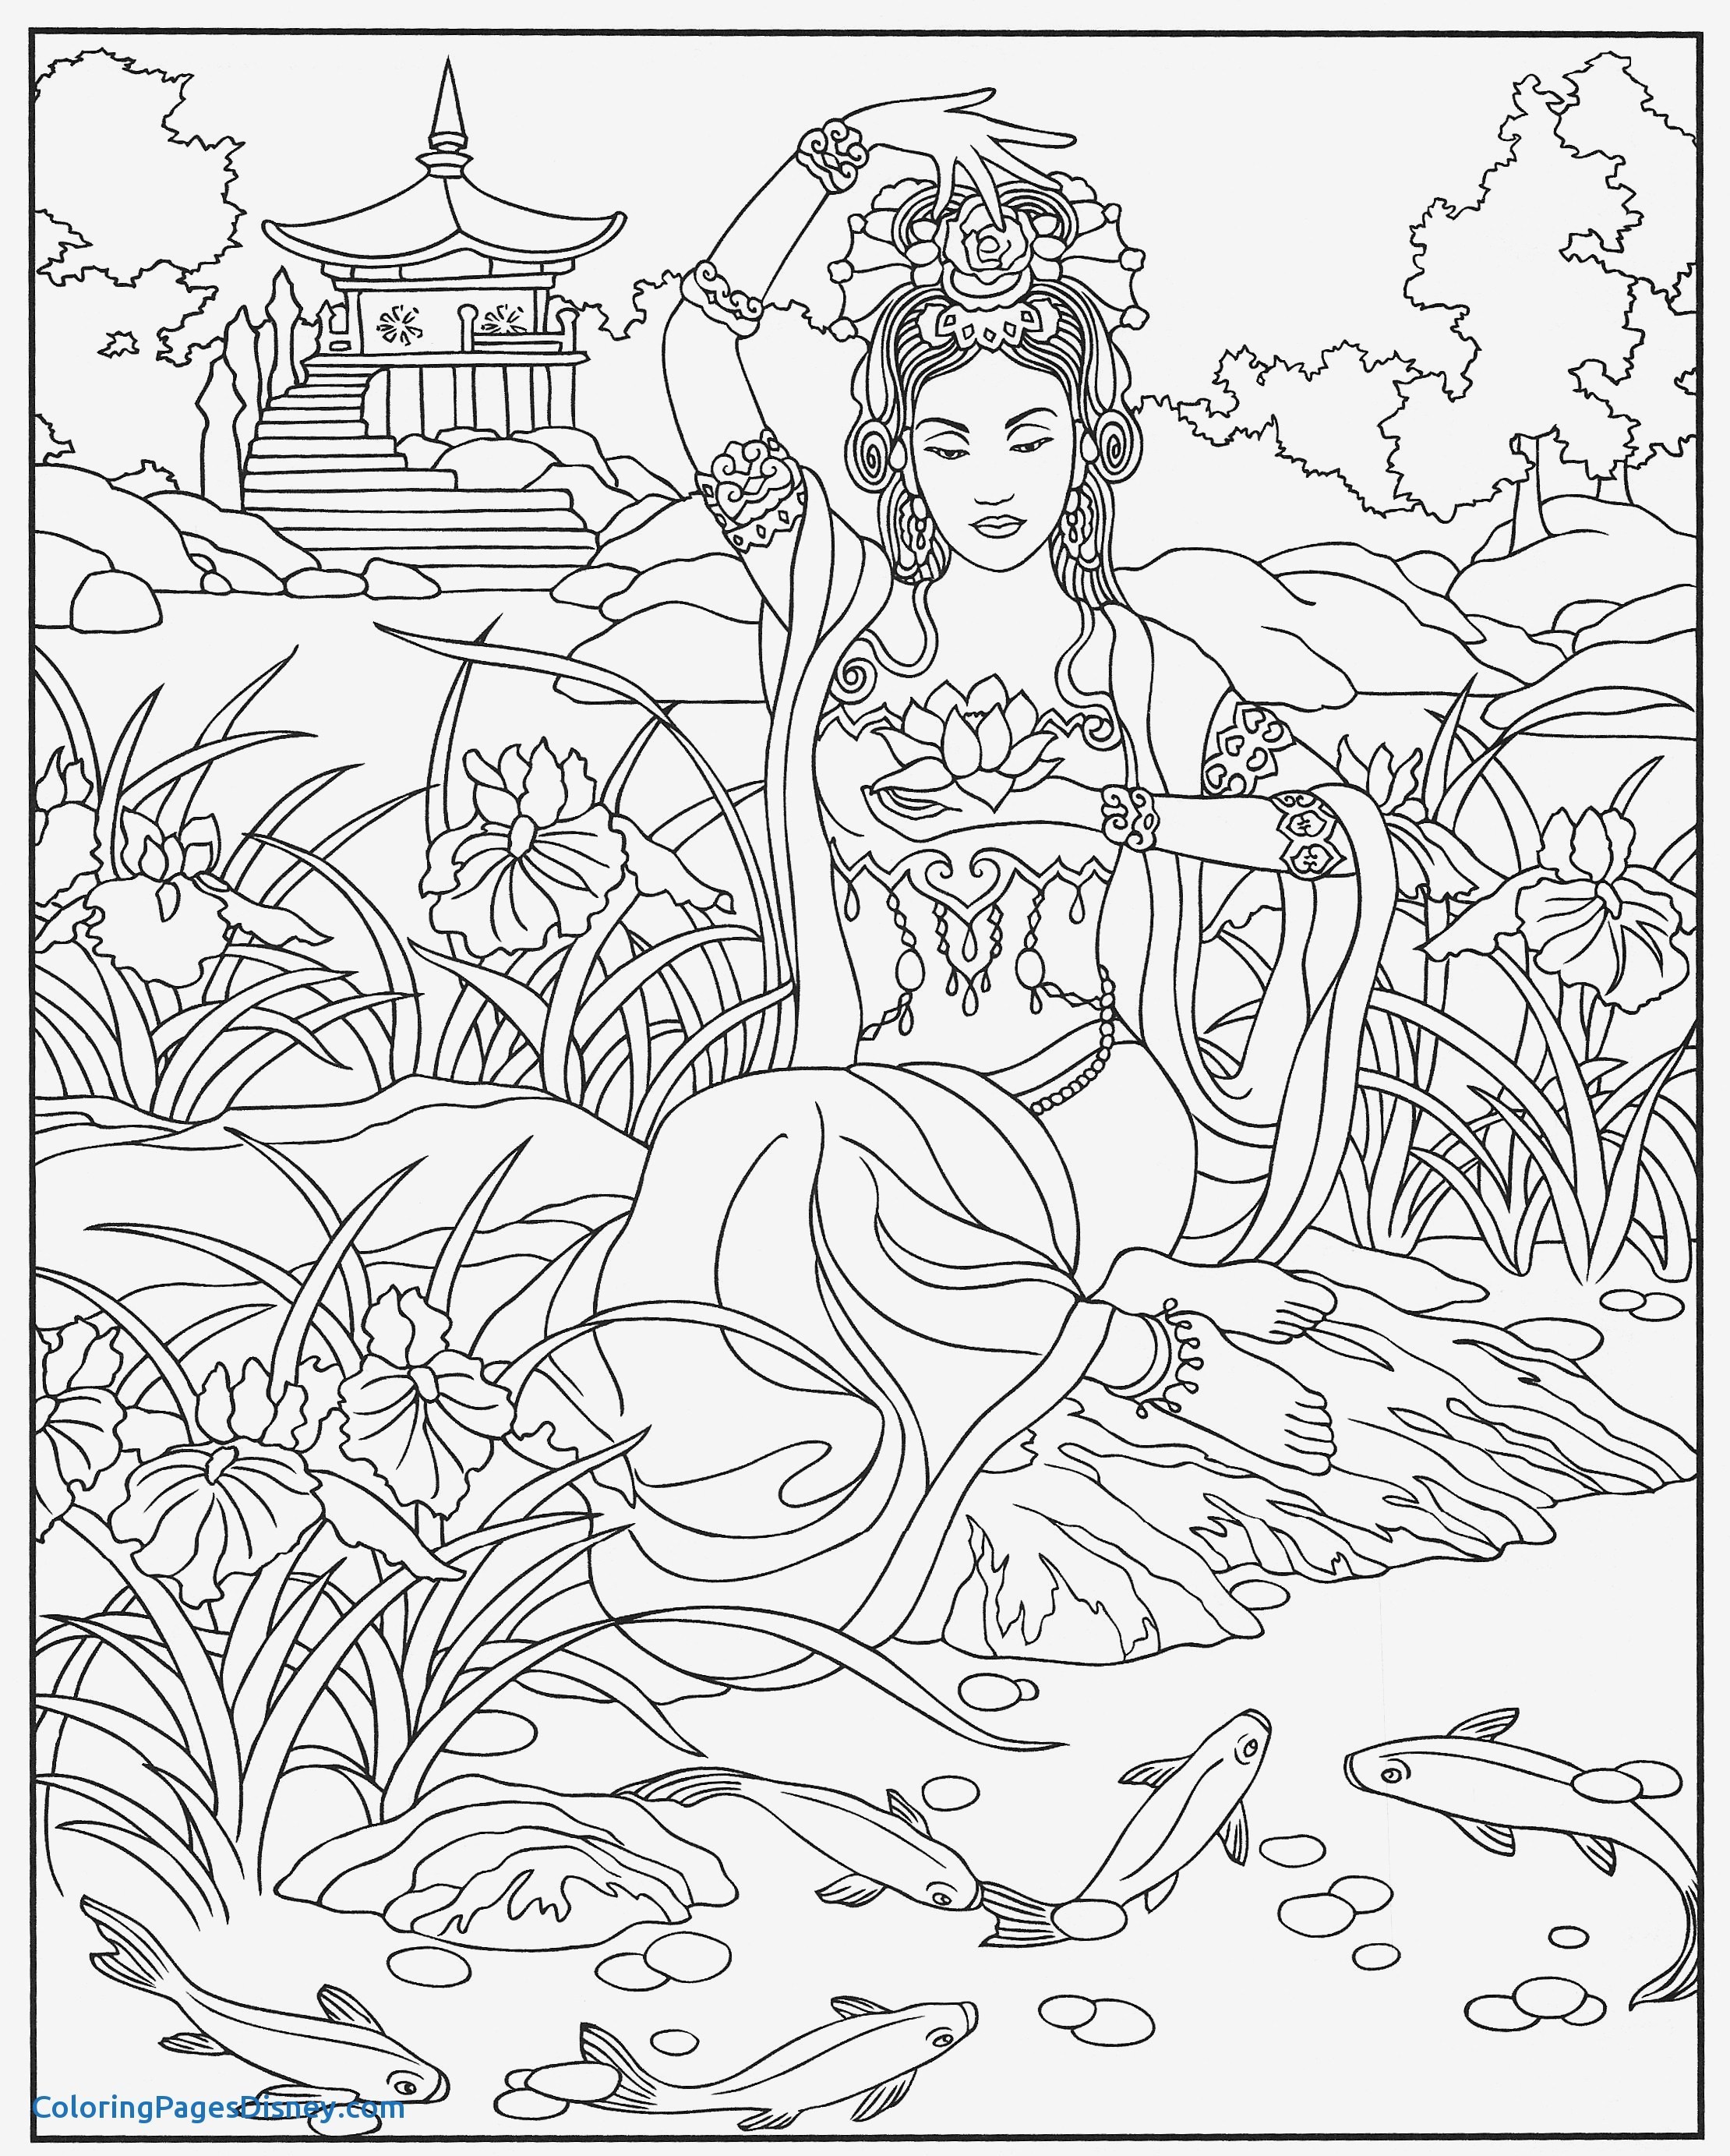 coloring-pages-princess-unicorn-of-coloring-pages-princess-unicorn Coloring Pages Princess Unicorn Cartoon 